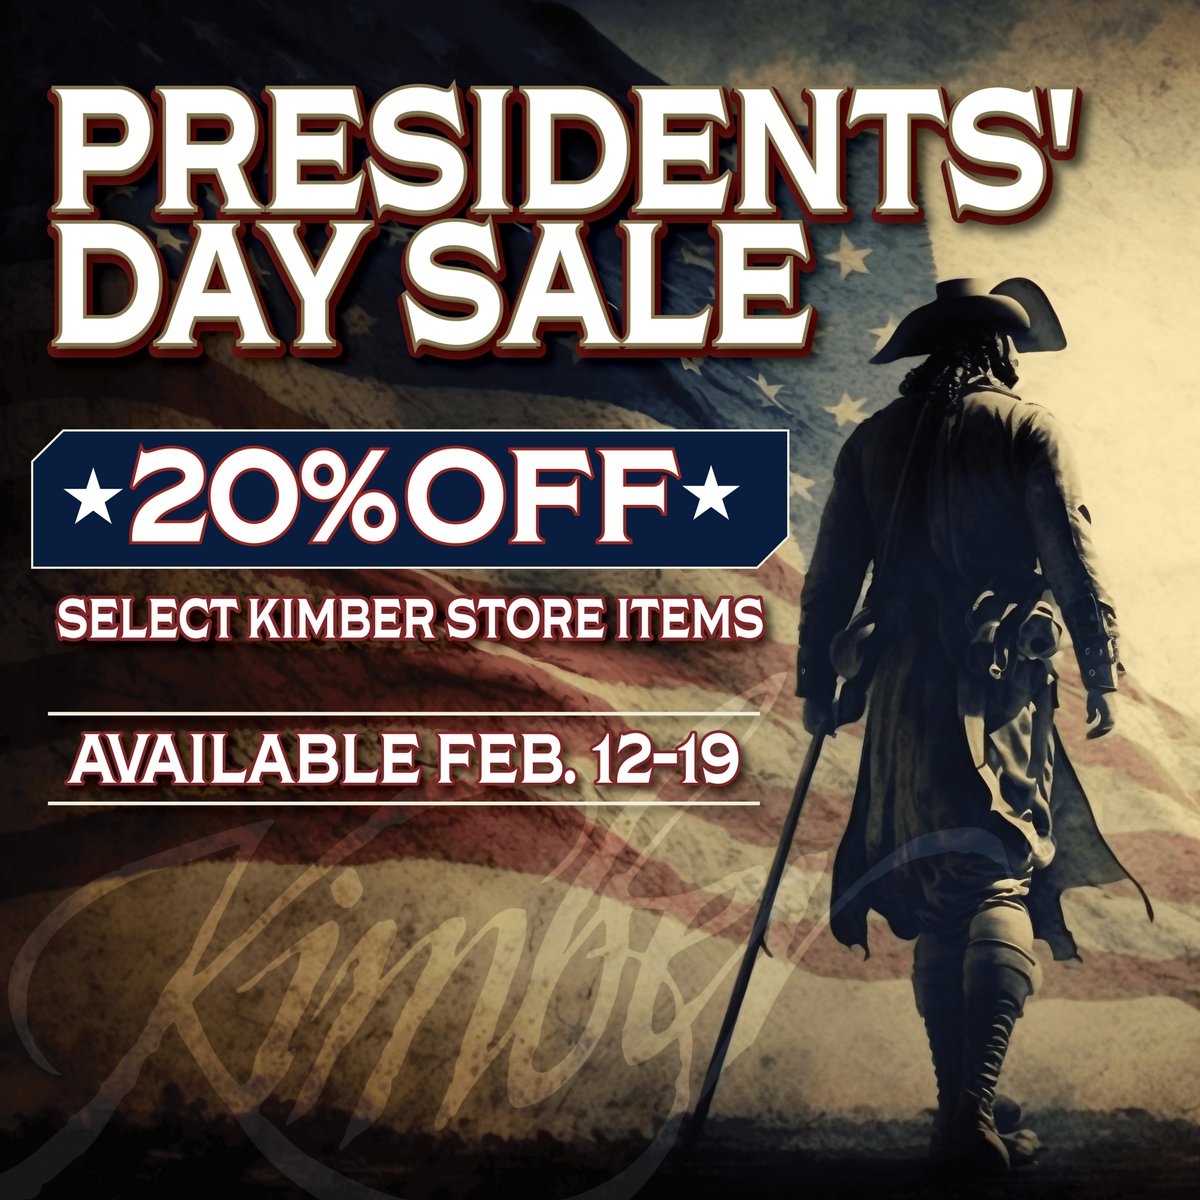 Presidents' Day Sale is now live! 20% off select Kimber Store items. Now through February 12th. bit.ly/497ypo4